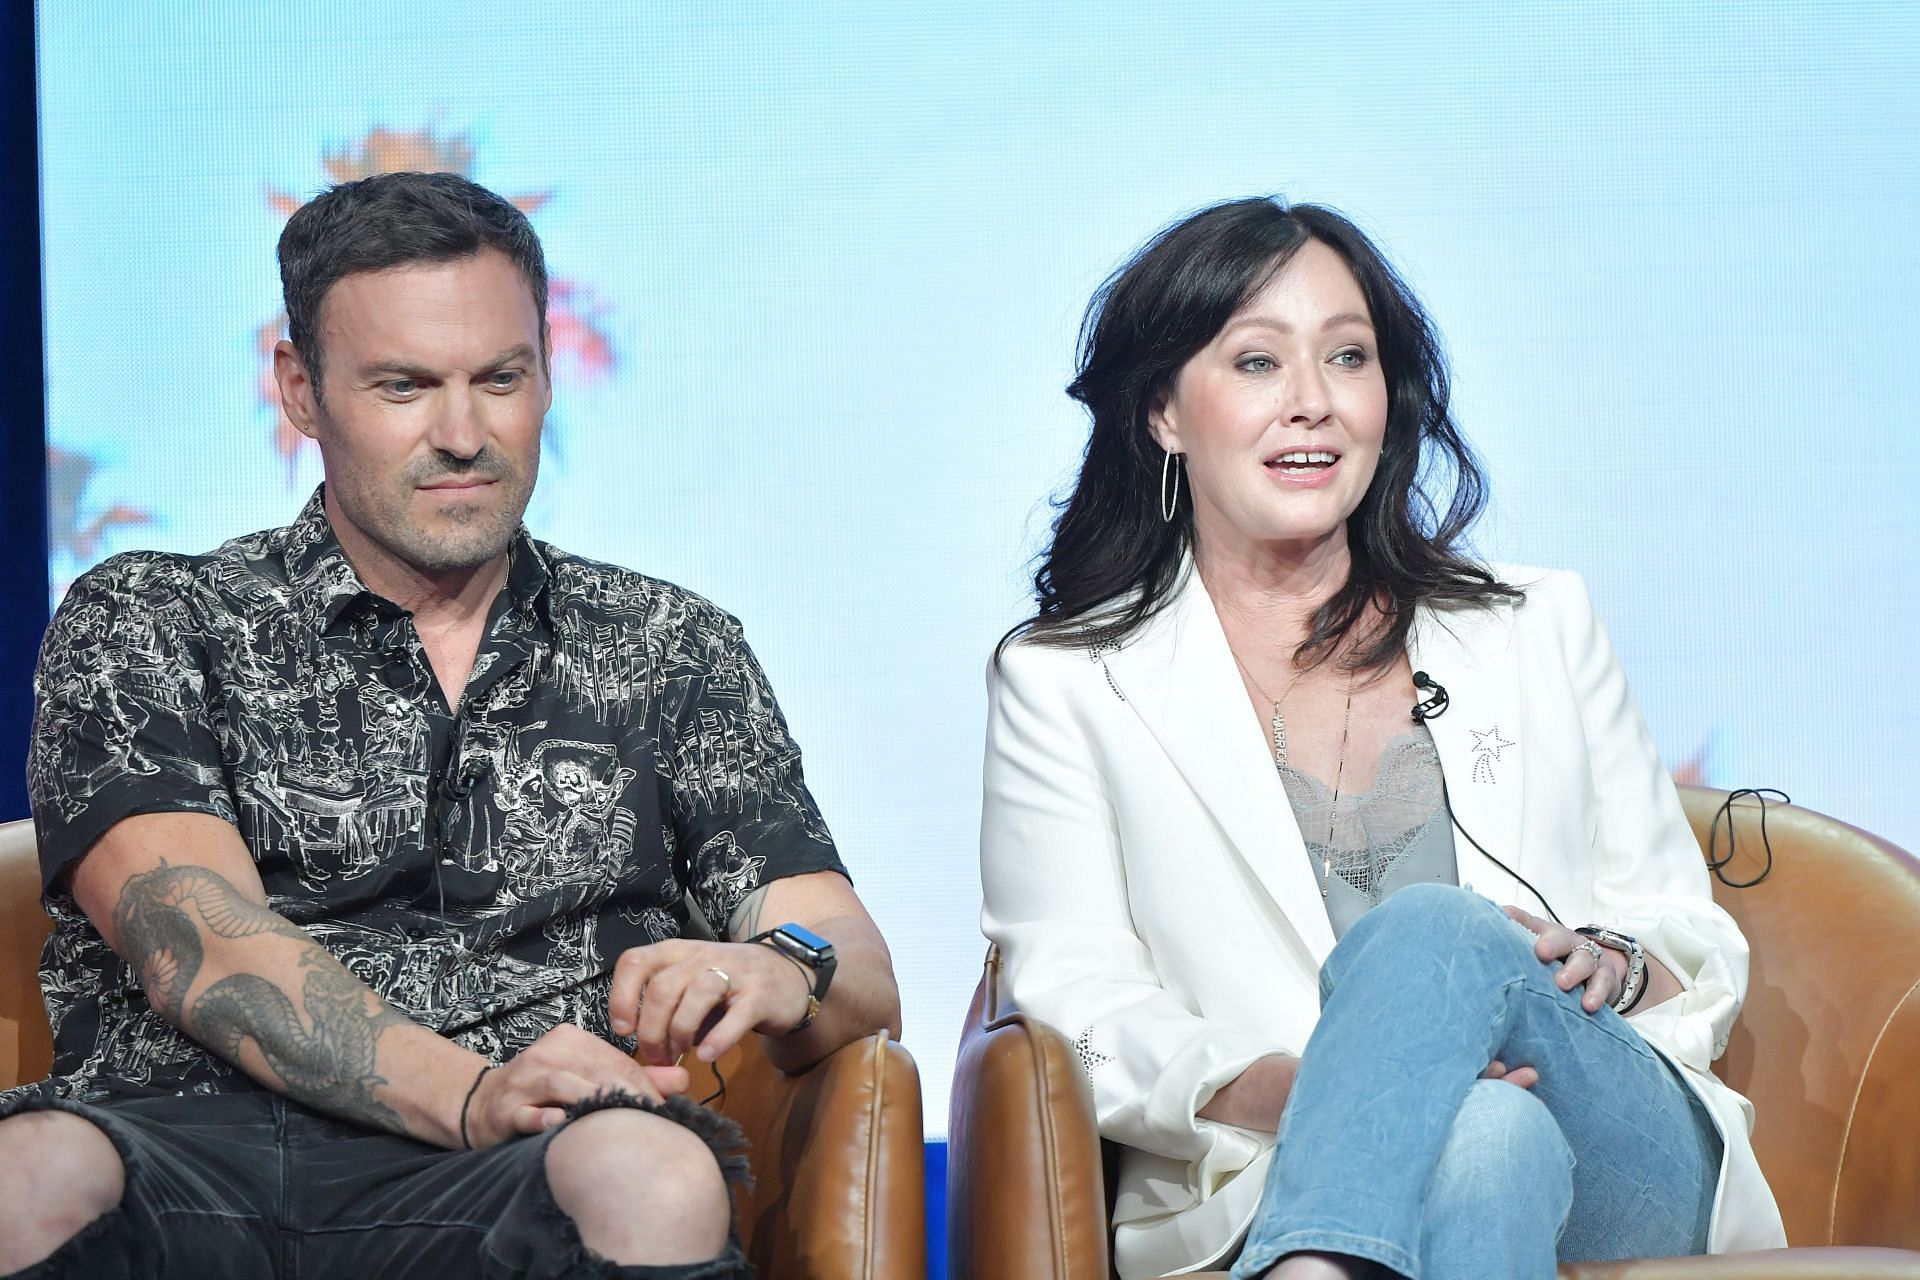 Brian Austin Green and Shannen Doherty for 90210 (Image via Amy Sussman/Getty Images)